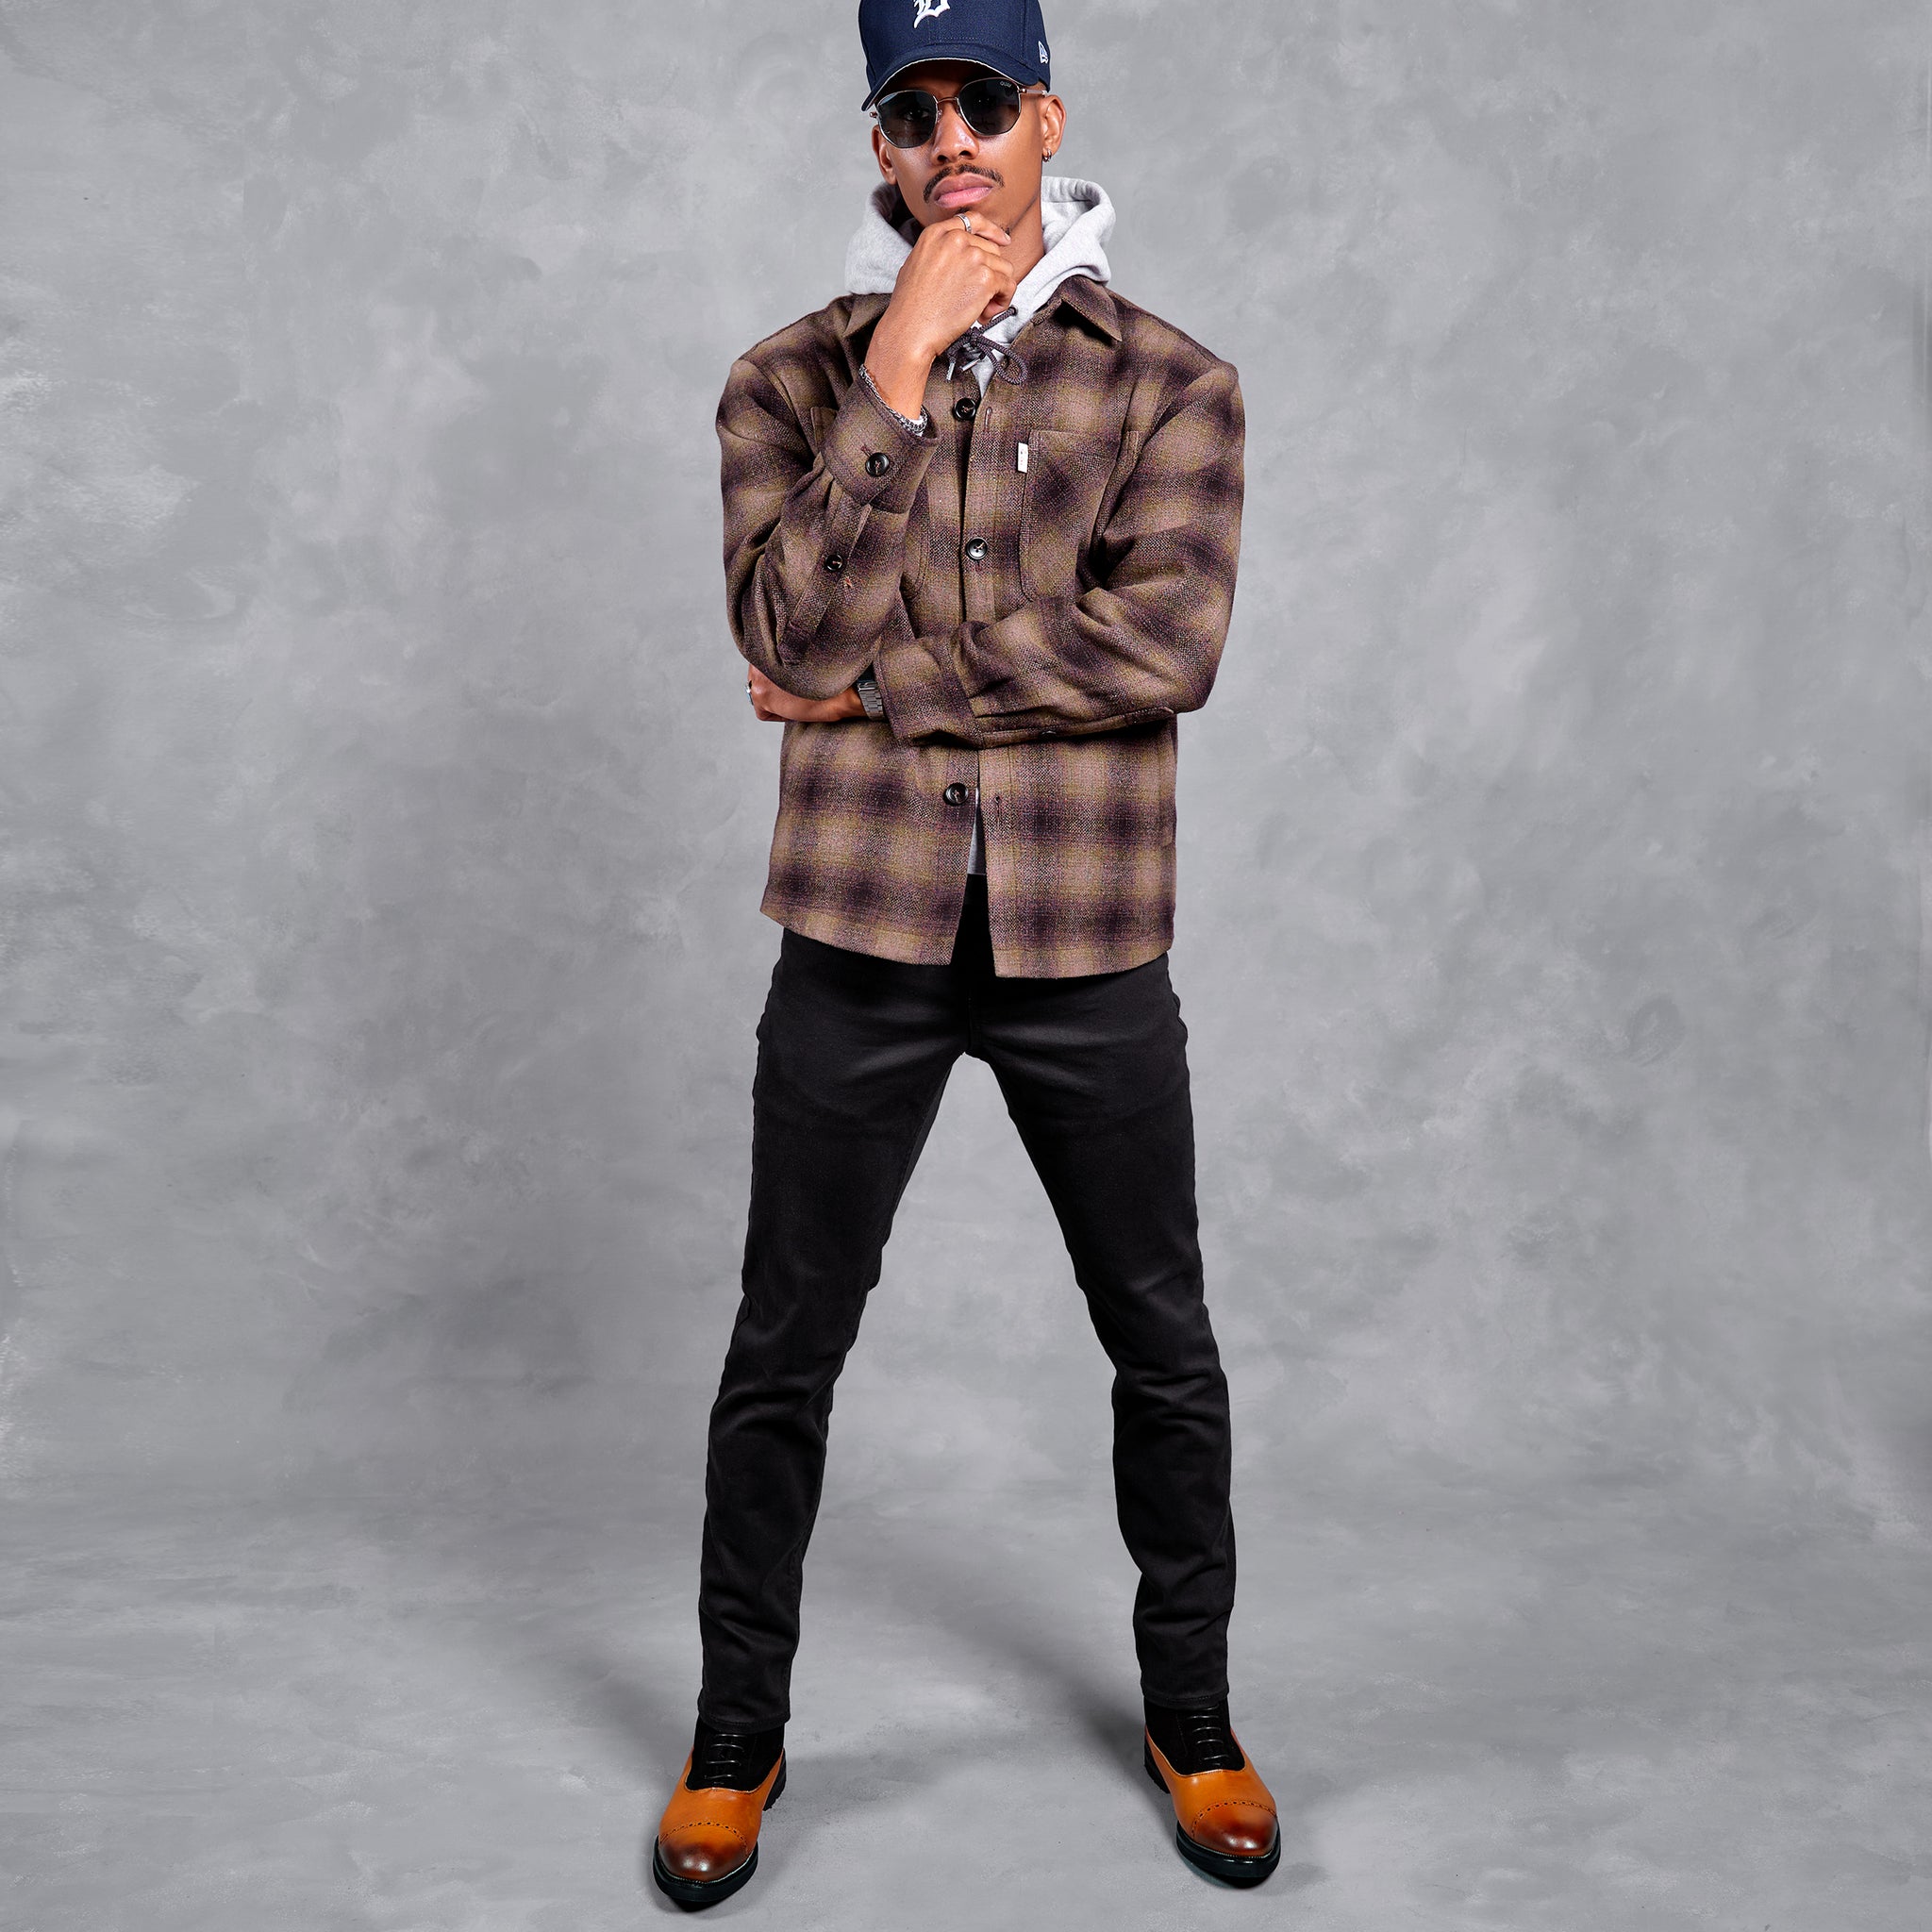 Southern Gents Quilted Overshirt - Bronze Plaid